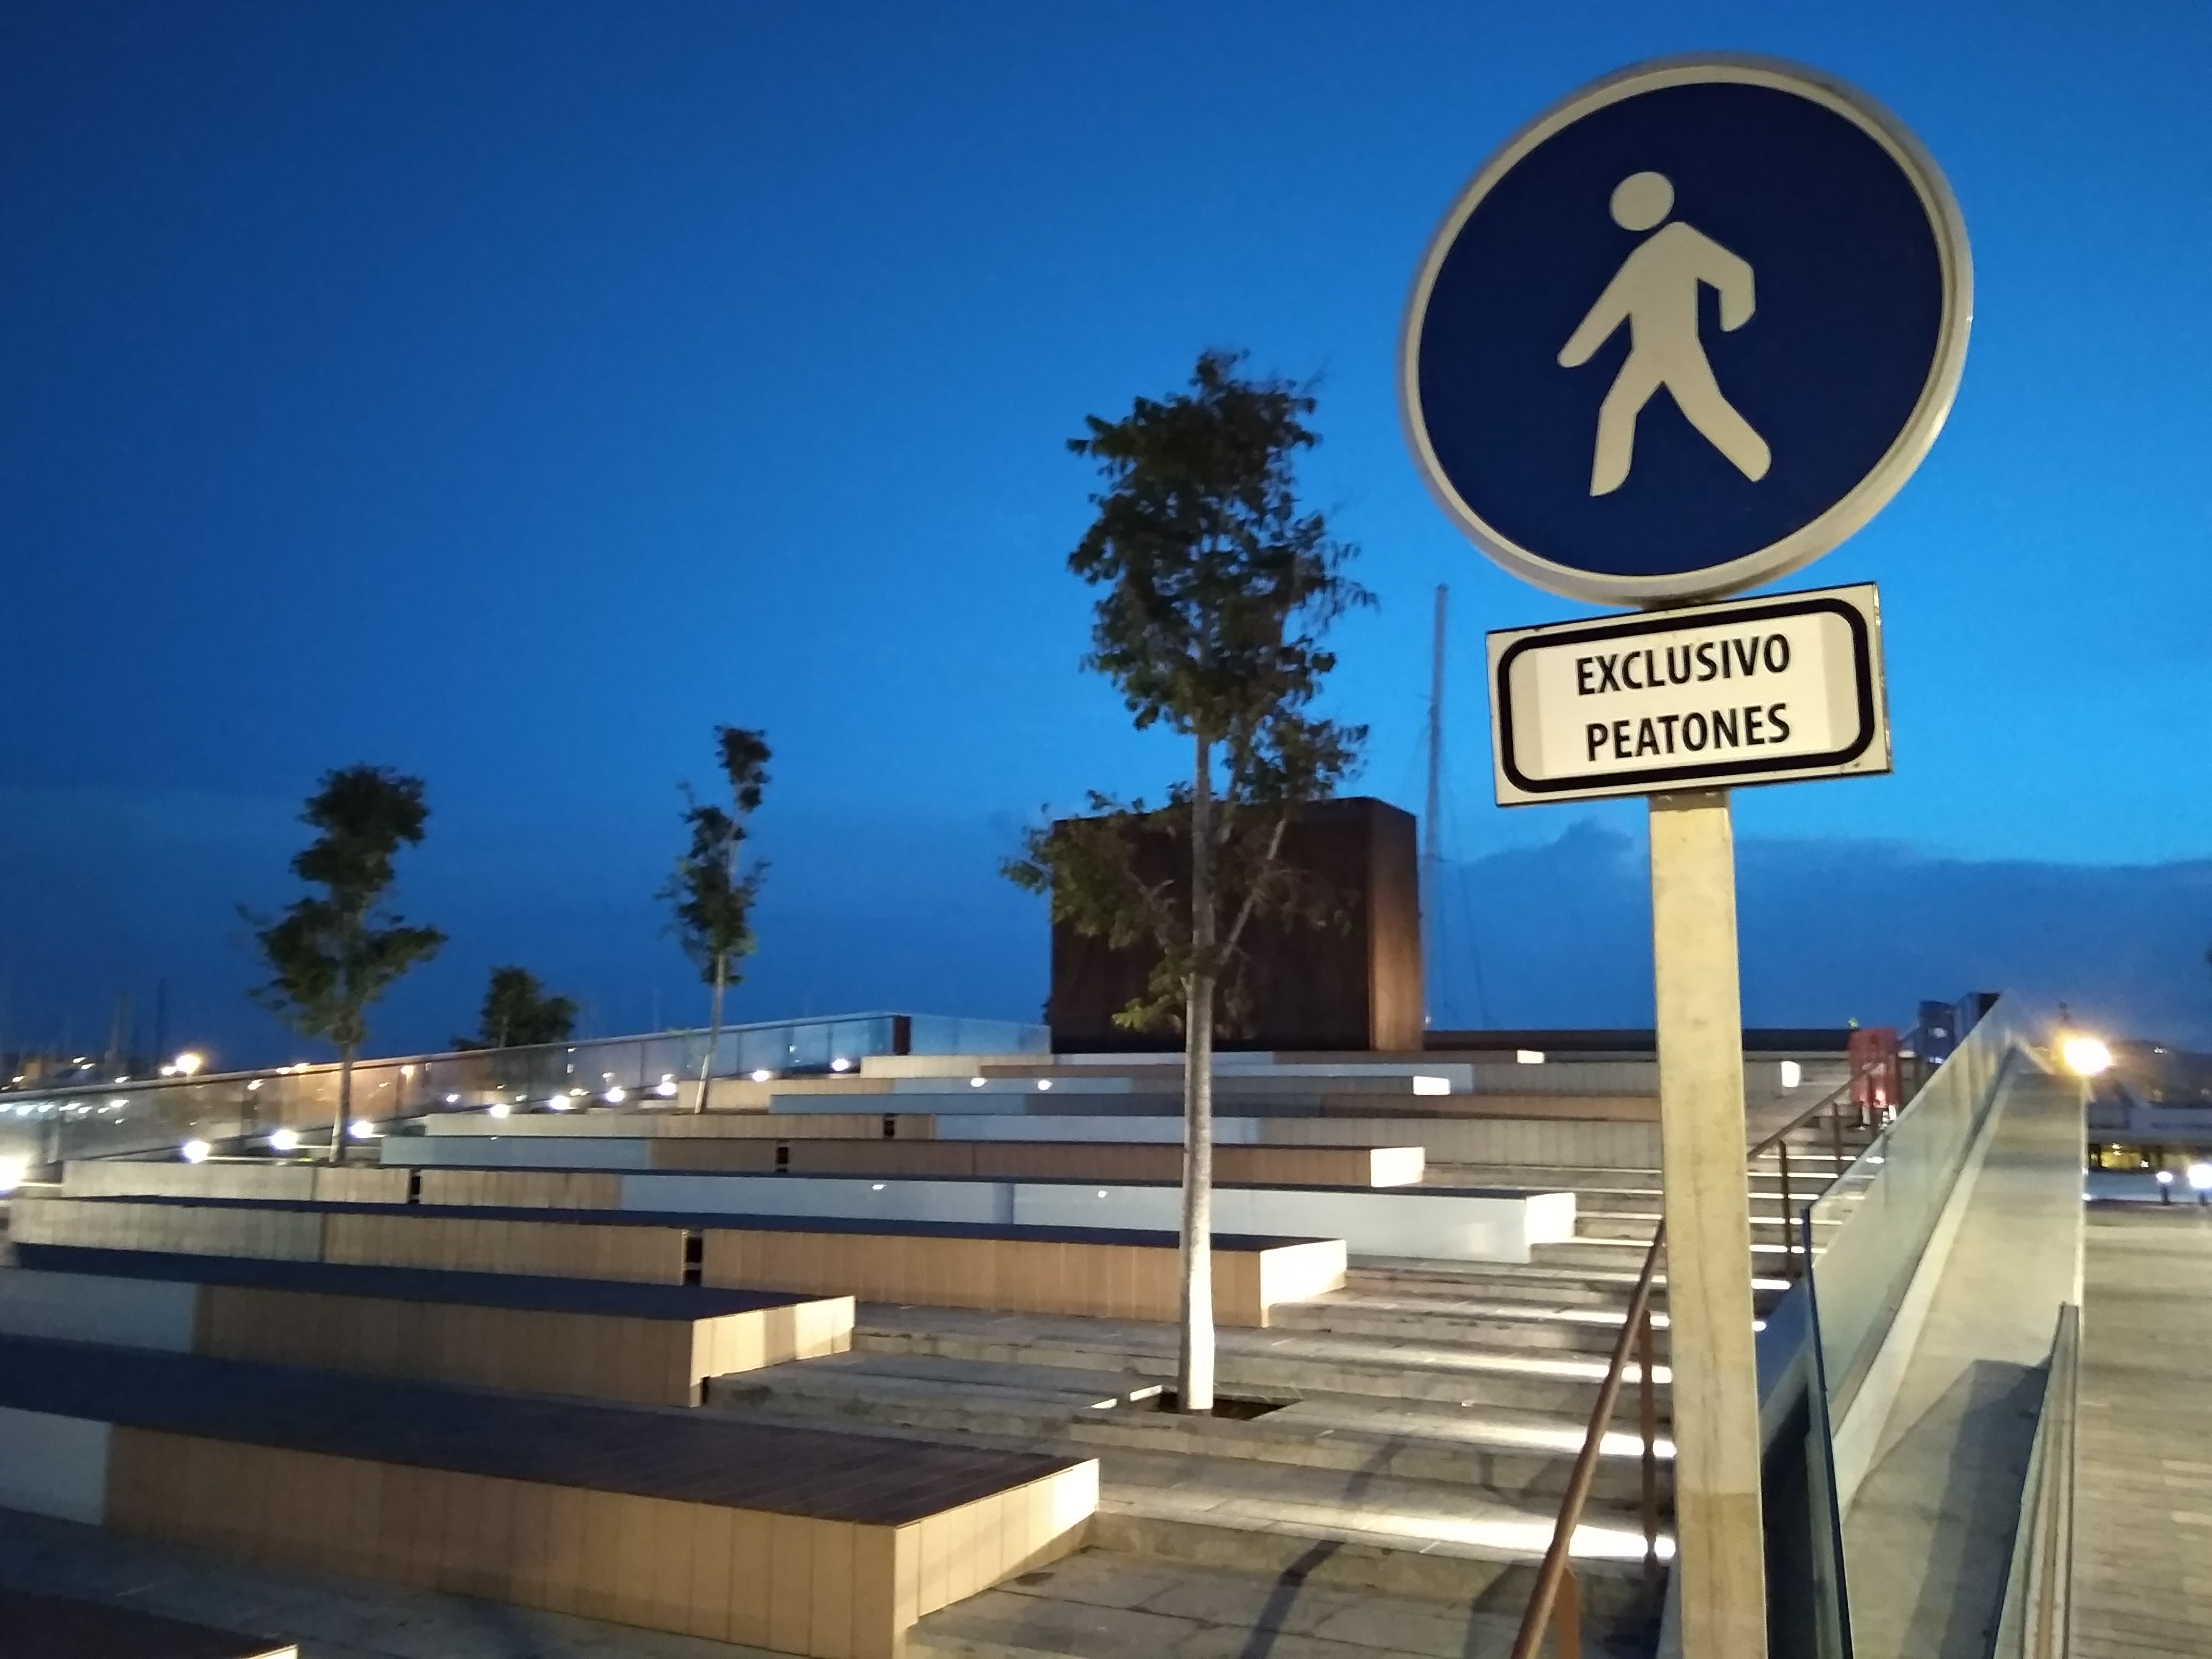 Plaza des Martell at the Port of Ibiza to be for the exclusive enjoyment of pedestrians